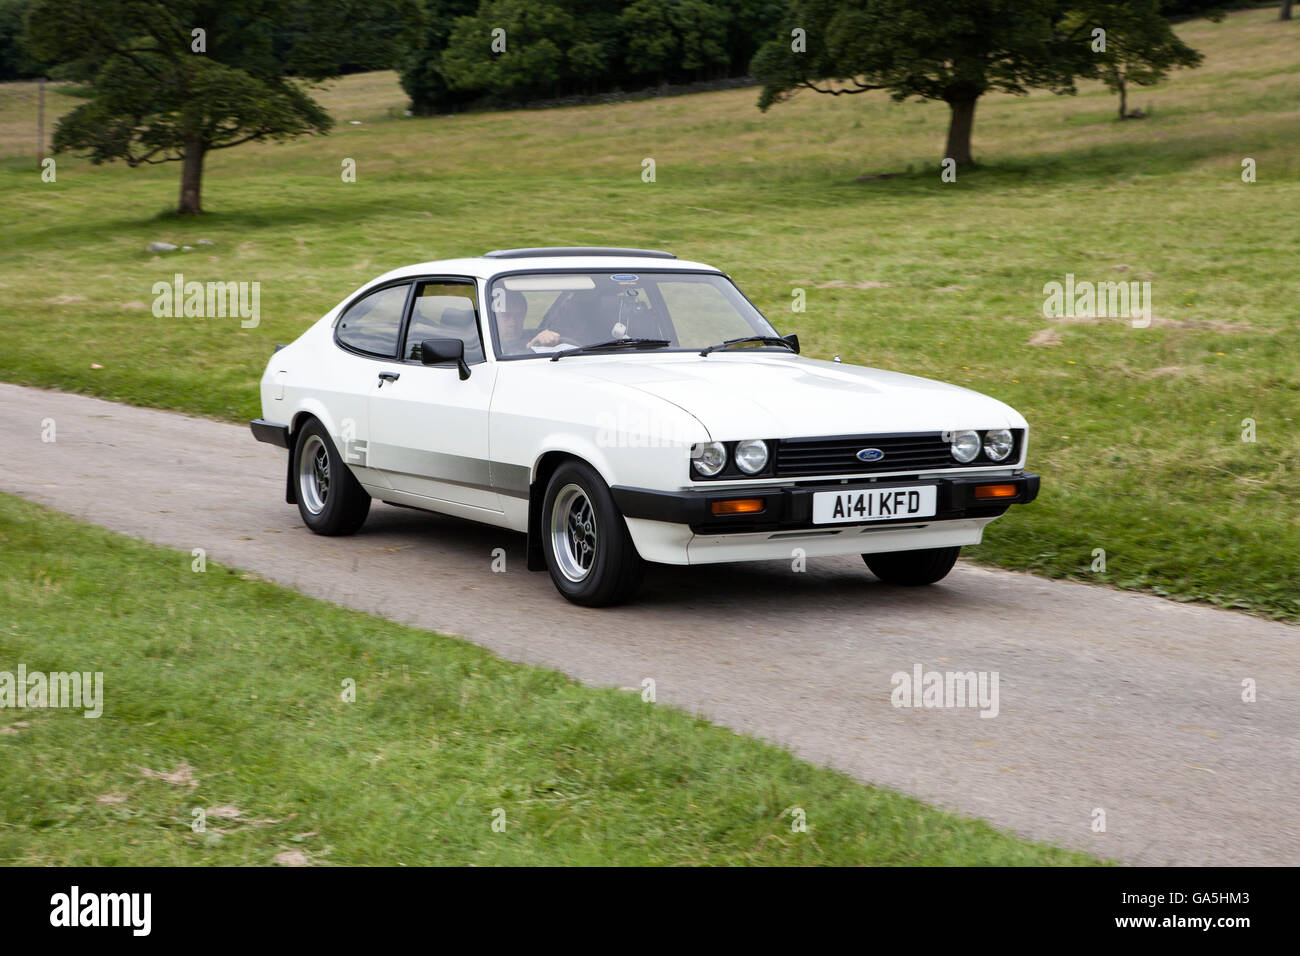 Cars of distinction  - Page 2 1984-white-ford-capri-s-5-speed-at-leighton-hall-classic-car-rally-GA5HM3